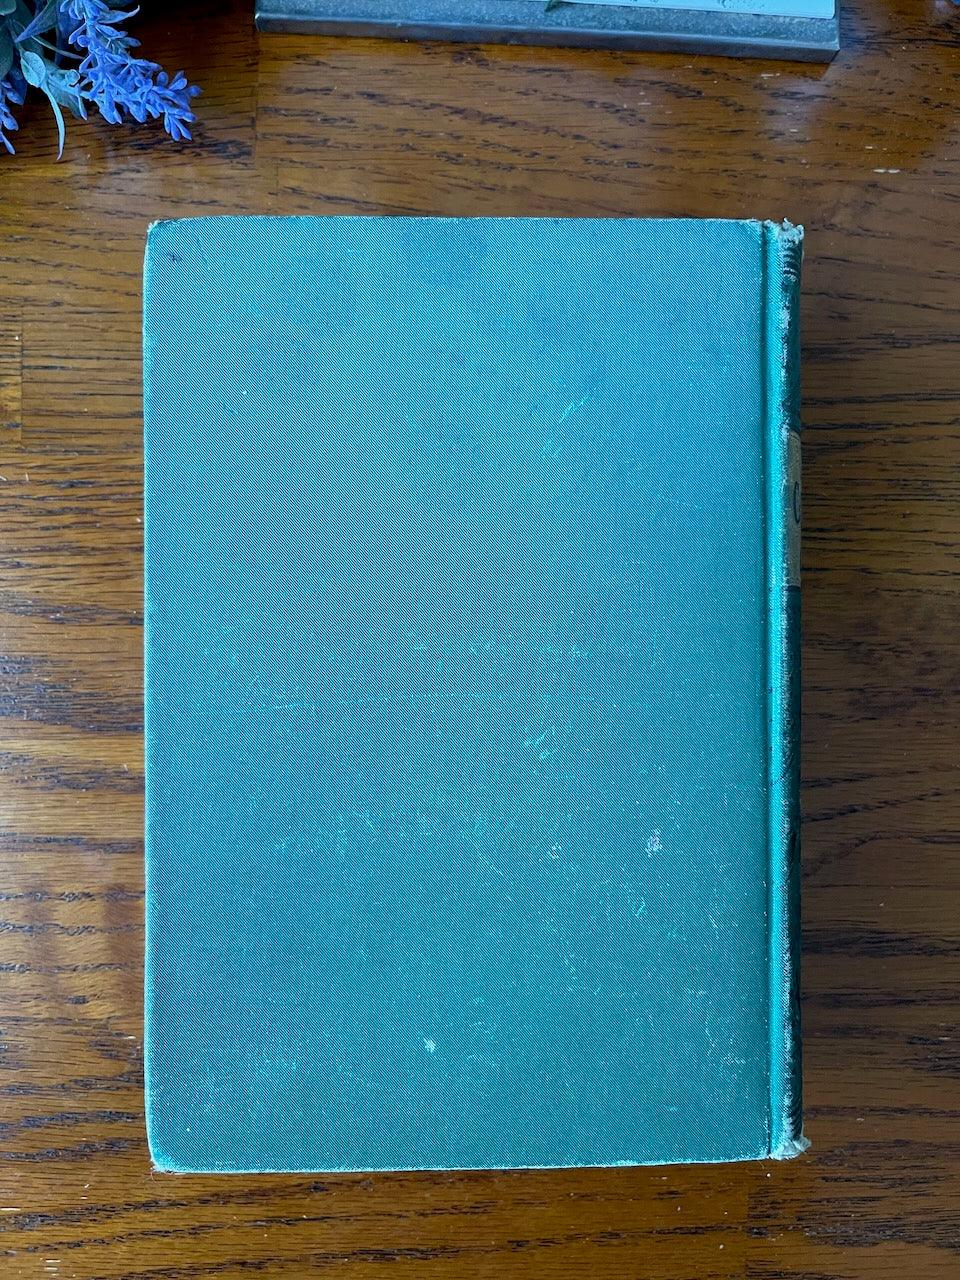 Military and civil life of General Ulysses S. Grant / 1885 - Precious Cache